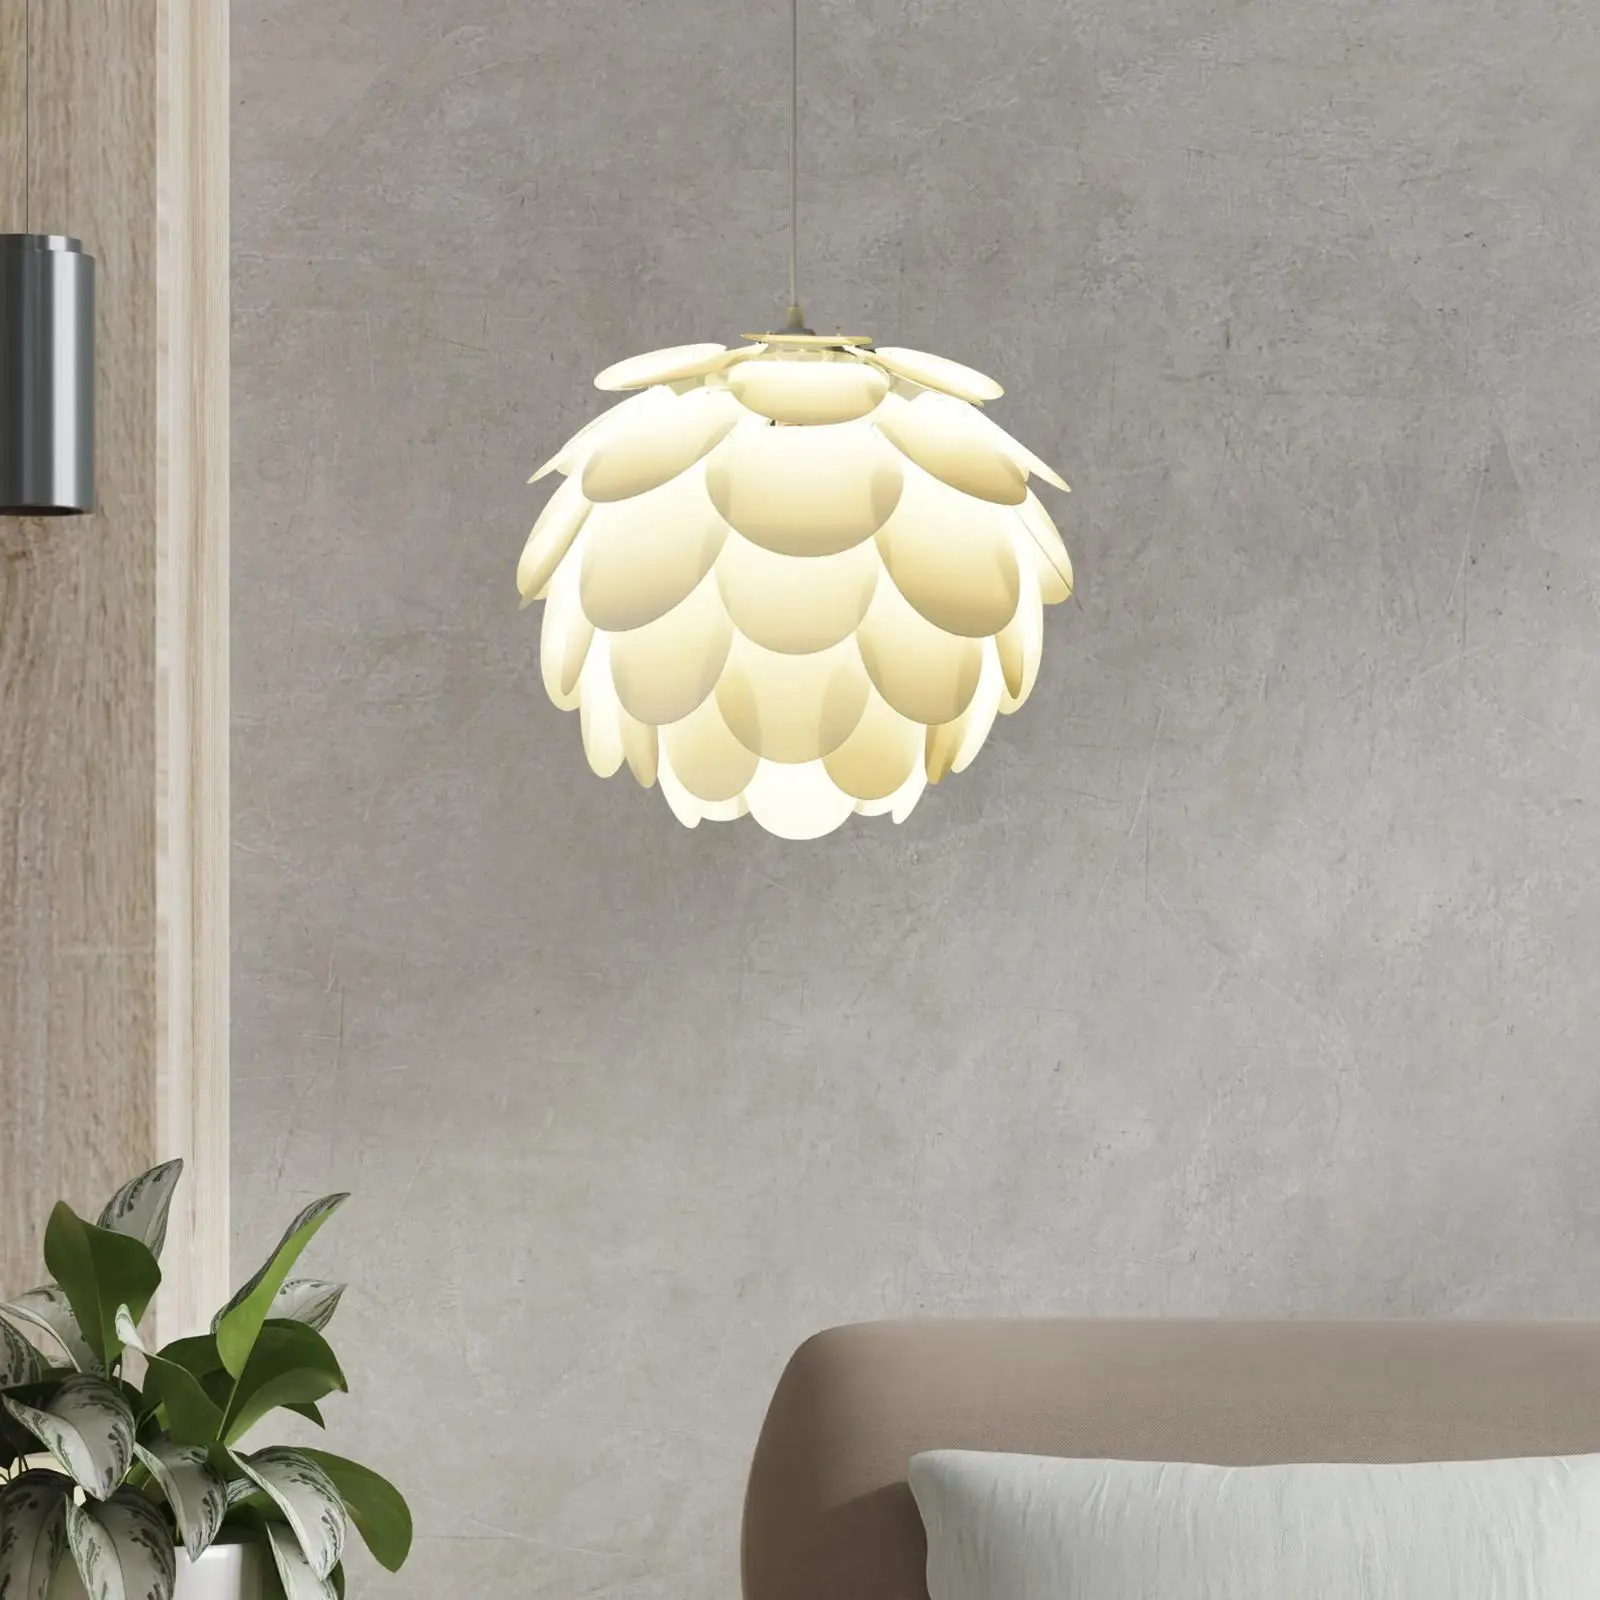 Decorative Lamp Shade Hanging Light Cover Crafts Minimalist Ceiling Light Shade for Club Bedroom Balcony Coffee Shop Decoration